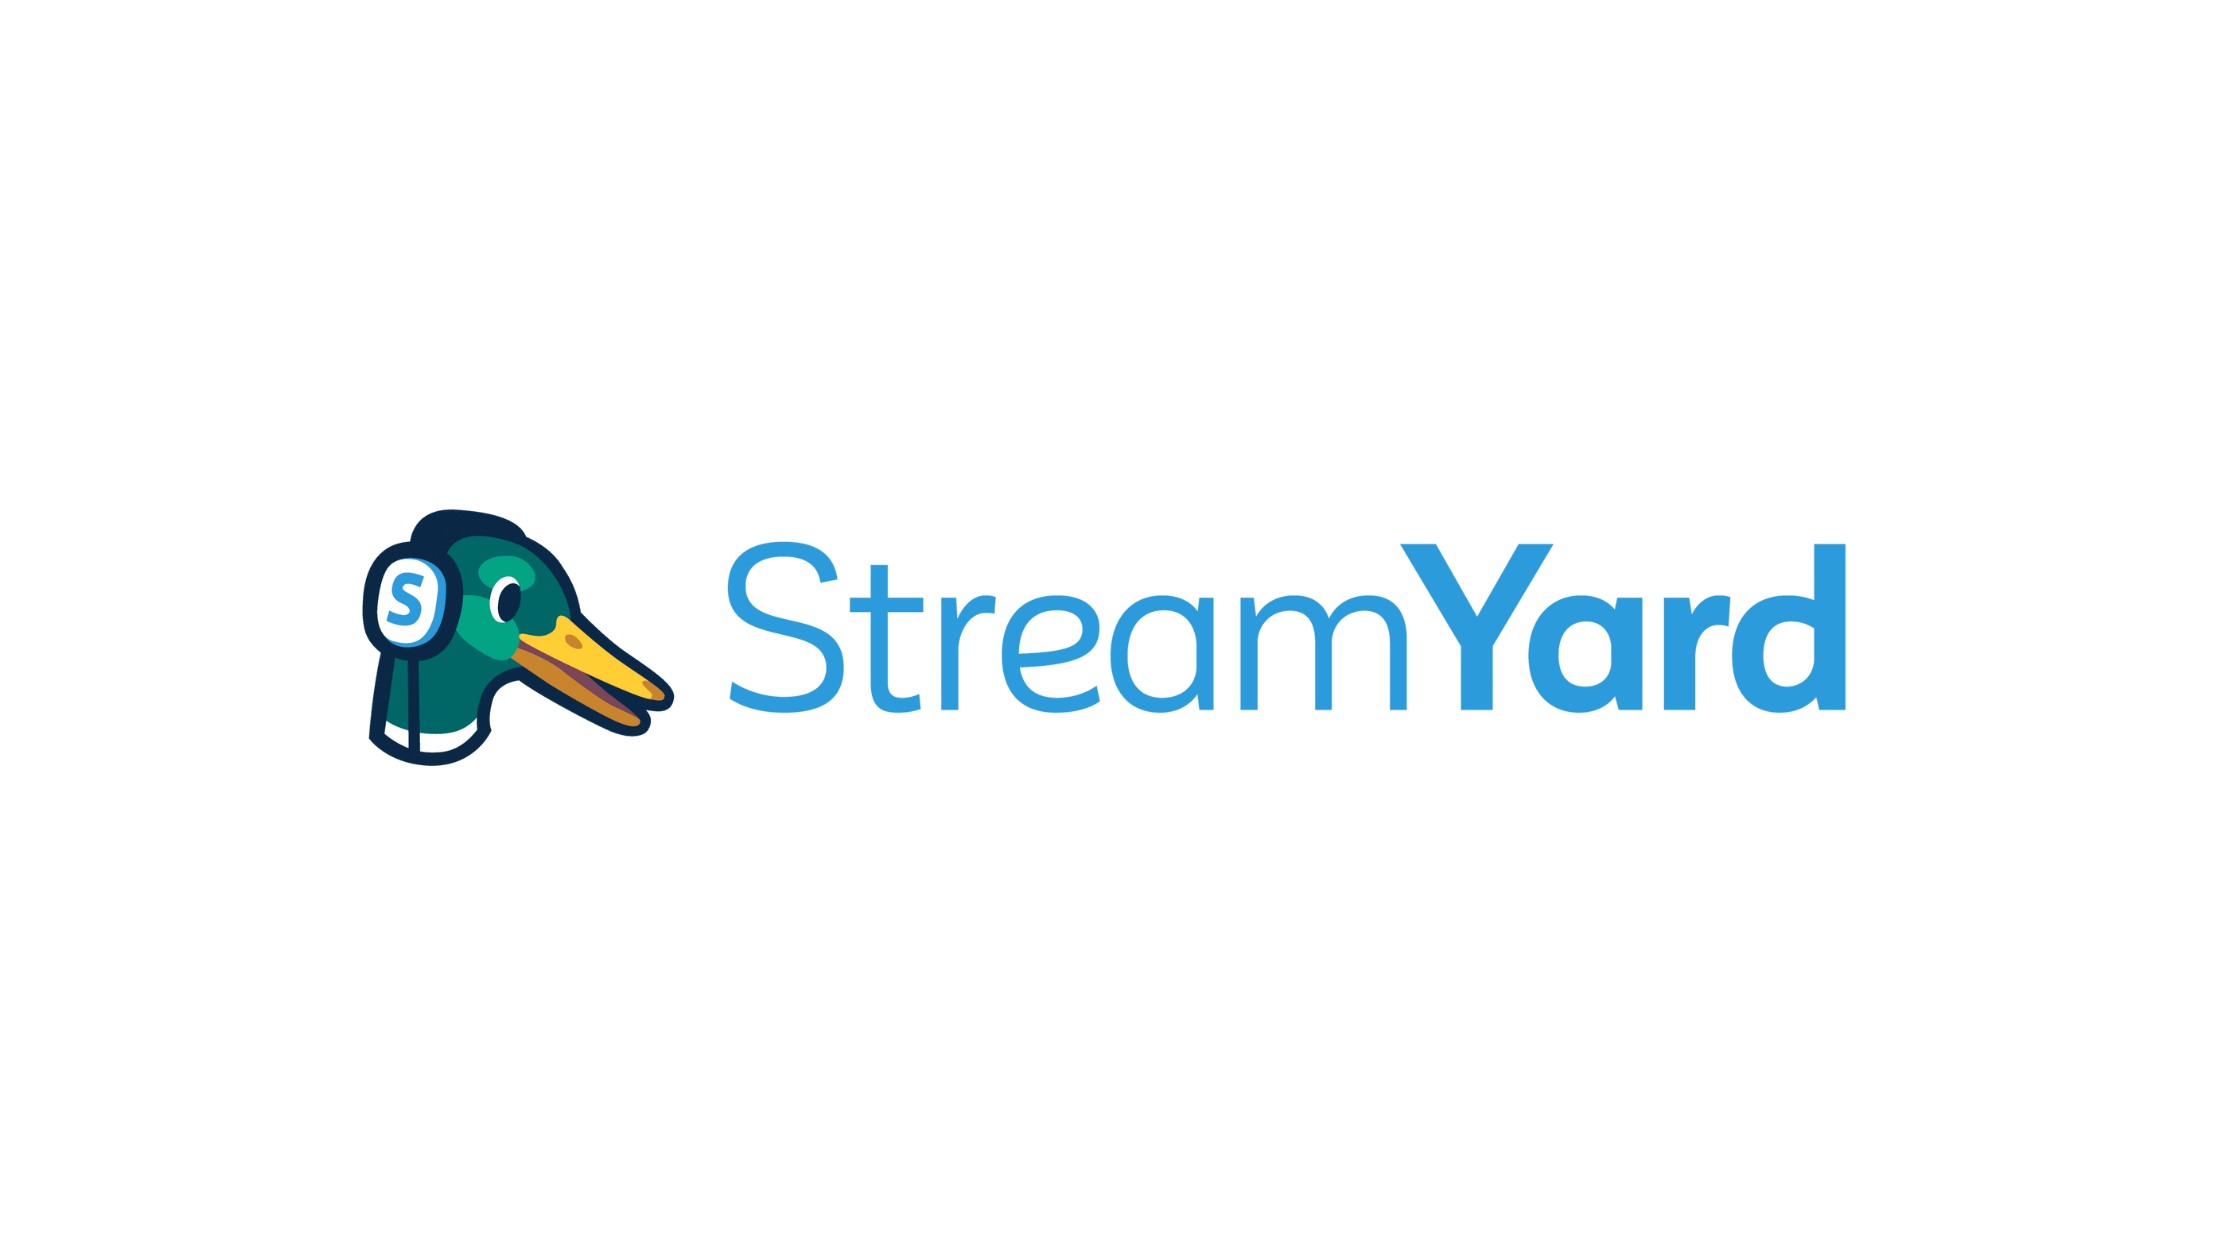 StreamYard Work From Home Opportunity